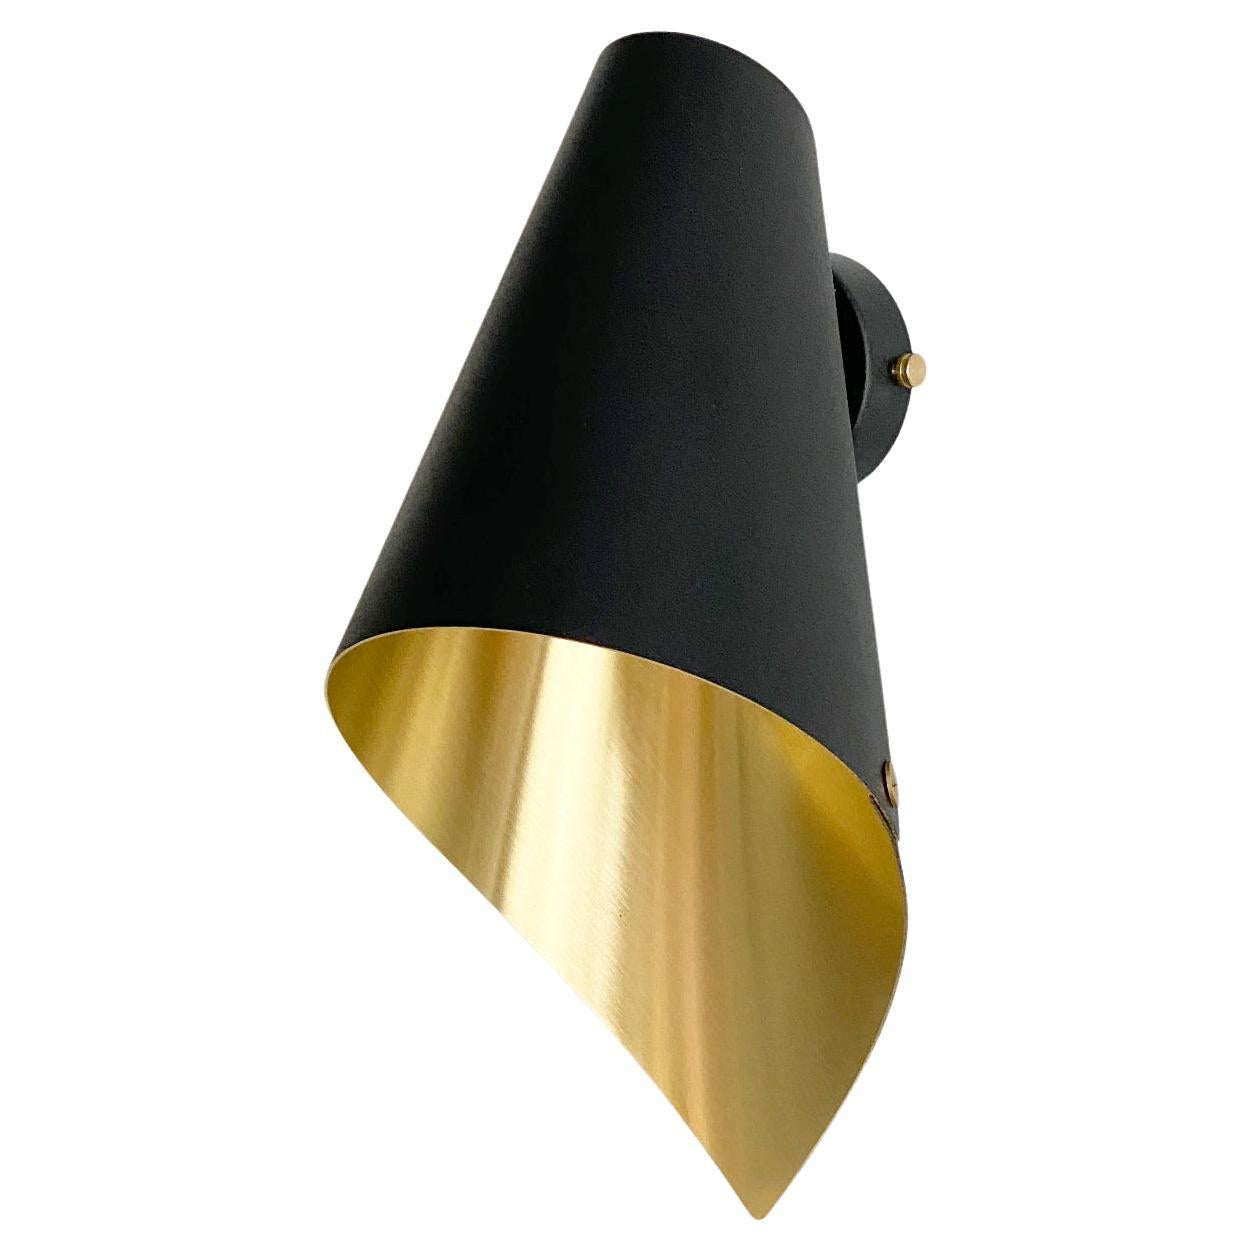 ARC MAXI Asymmetric Wall Light in Black & Brushed Brass Made in Britain